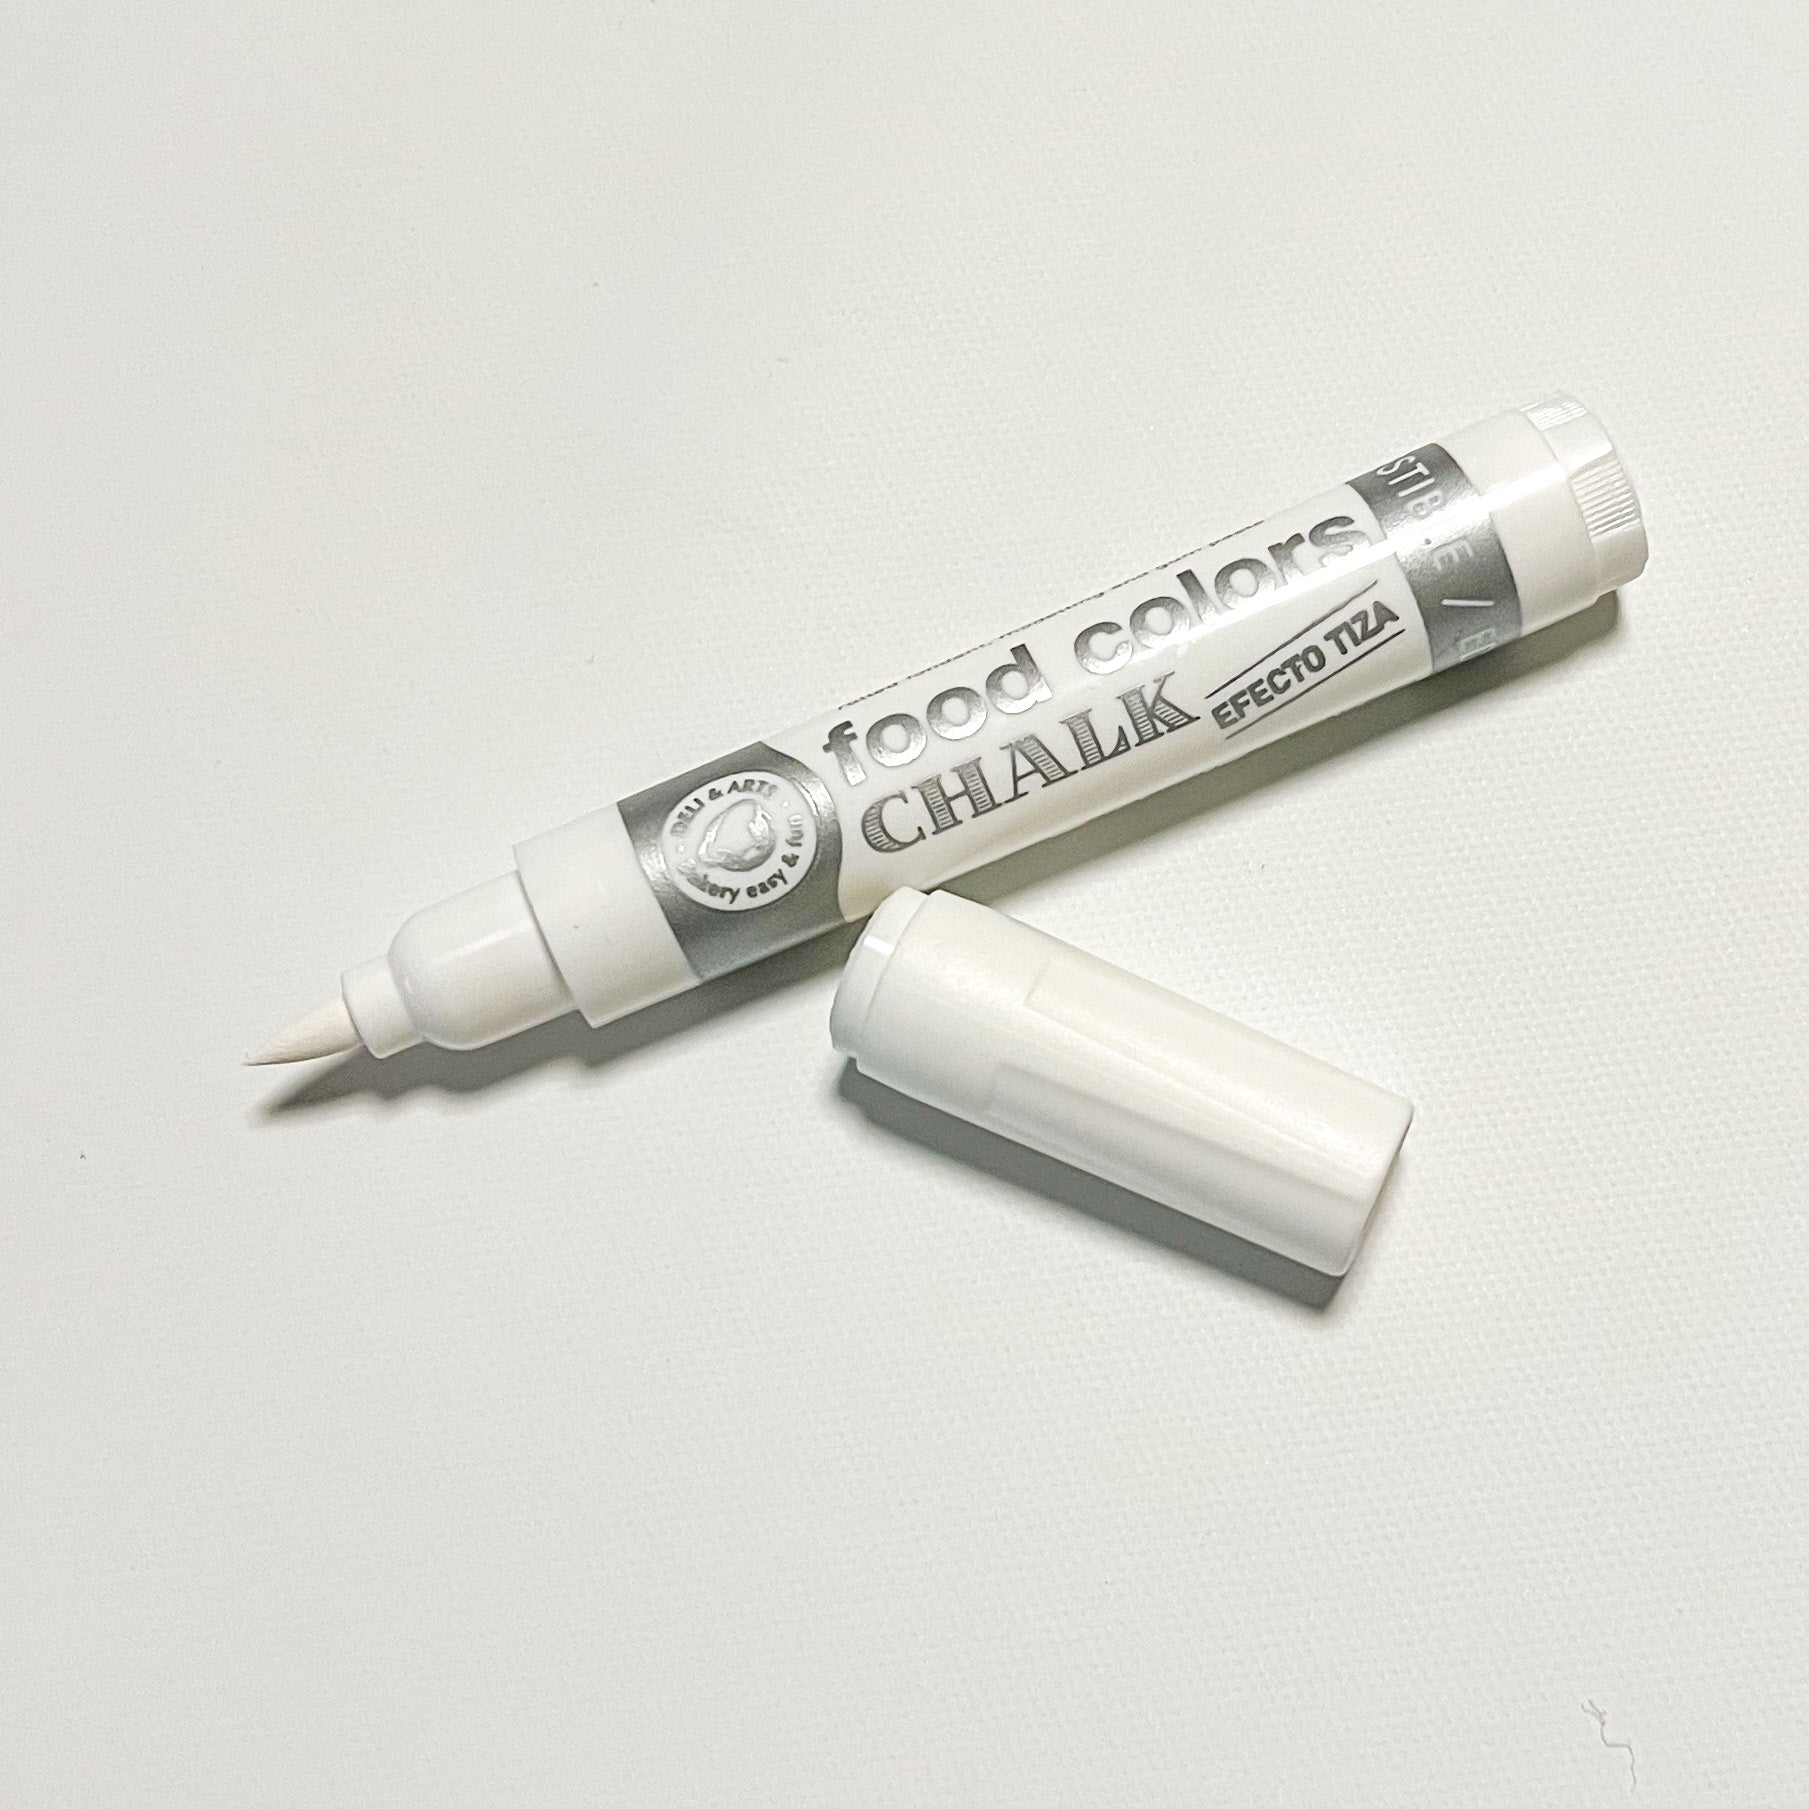 White Chalk Edible Ink Marker by DripColor – BeskeBakes